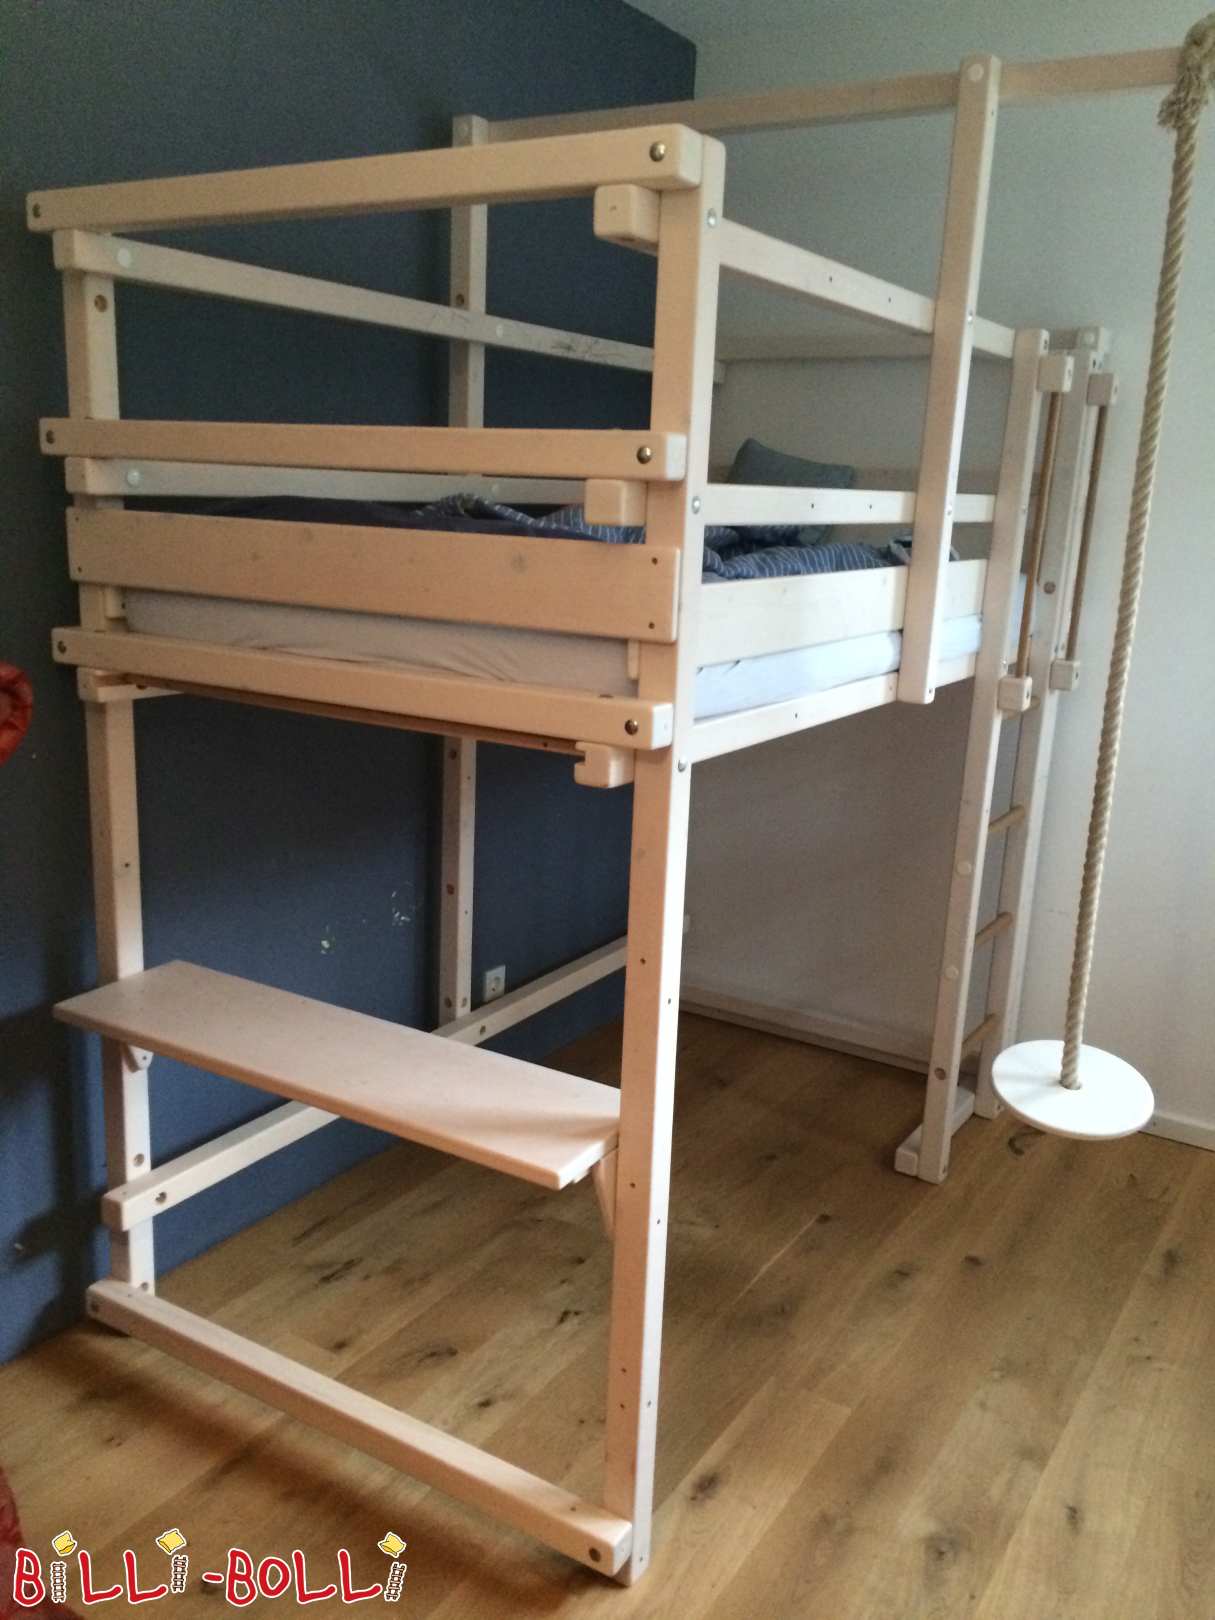 Laterally offset bunk bed, white glazed, 100x200 cm with swing (Category: Bunk Bed Laterally Staggered pre-owned)